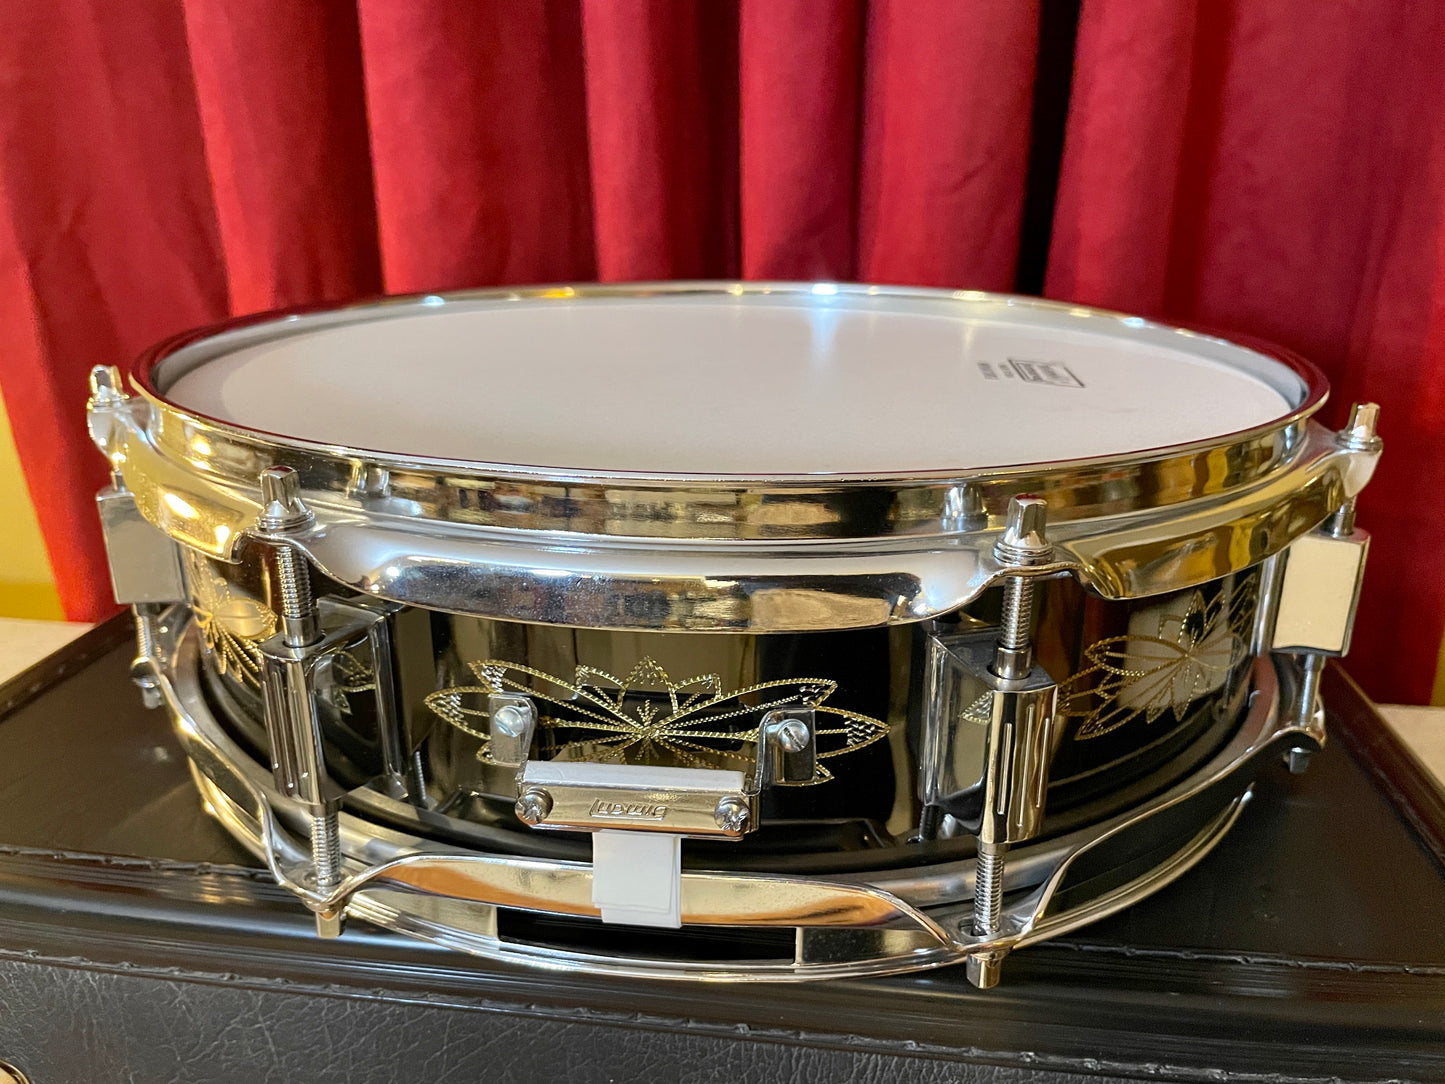 N.O.S. 1990s Ludwig 3x13 Limited Edition 12 Point Floral Engraved Black Beauty Snare Drum w/ Case